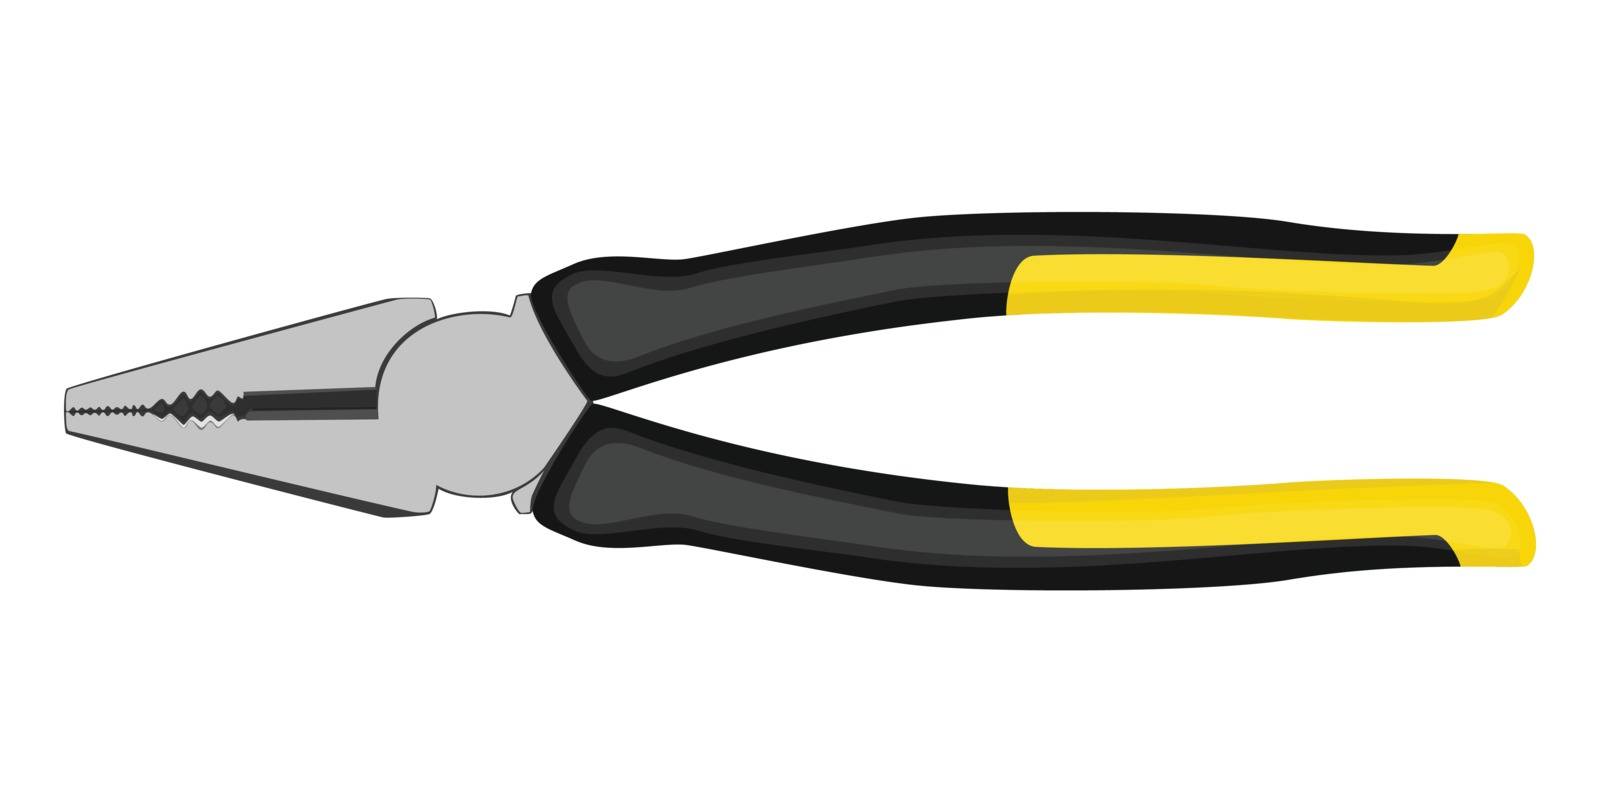 pliers with rubberized handles with yellow accents